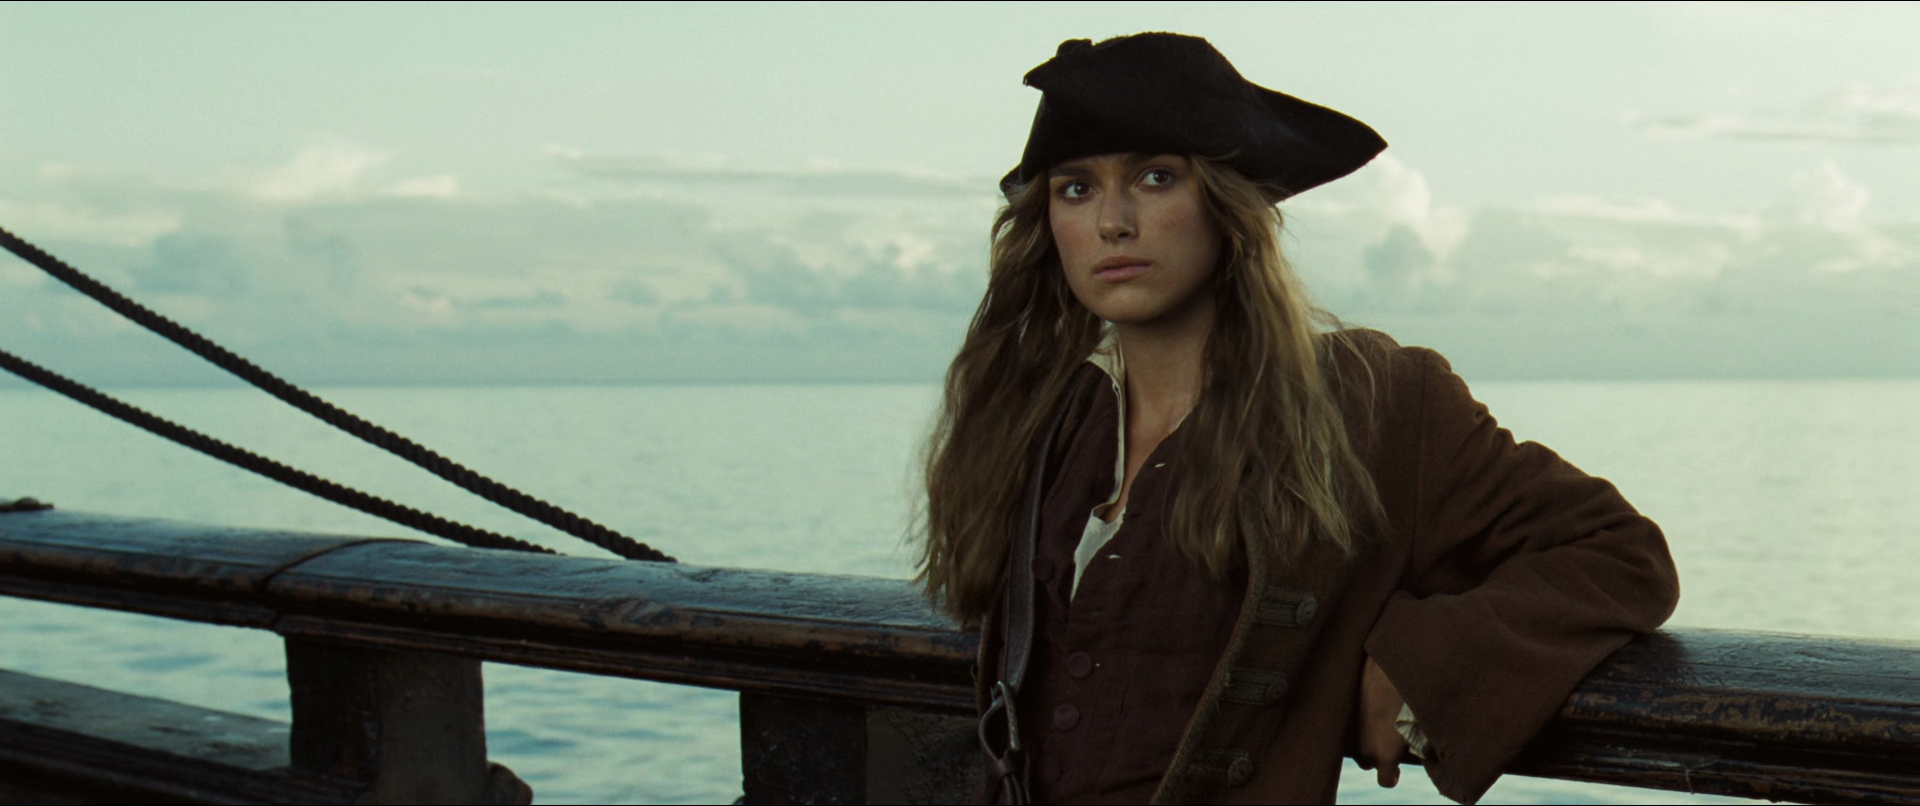 Elizabeth Swann (Keira Knightley) plans her next move in Pirates of the Caribbean: Dead Man's Chest (2006).